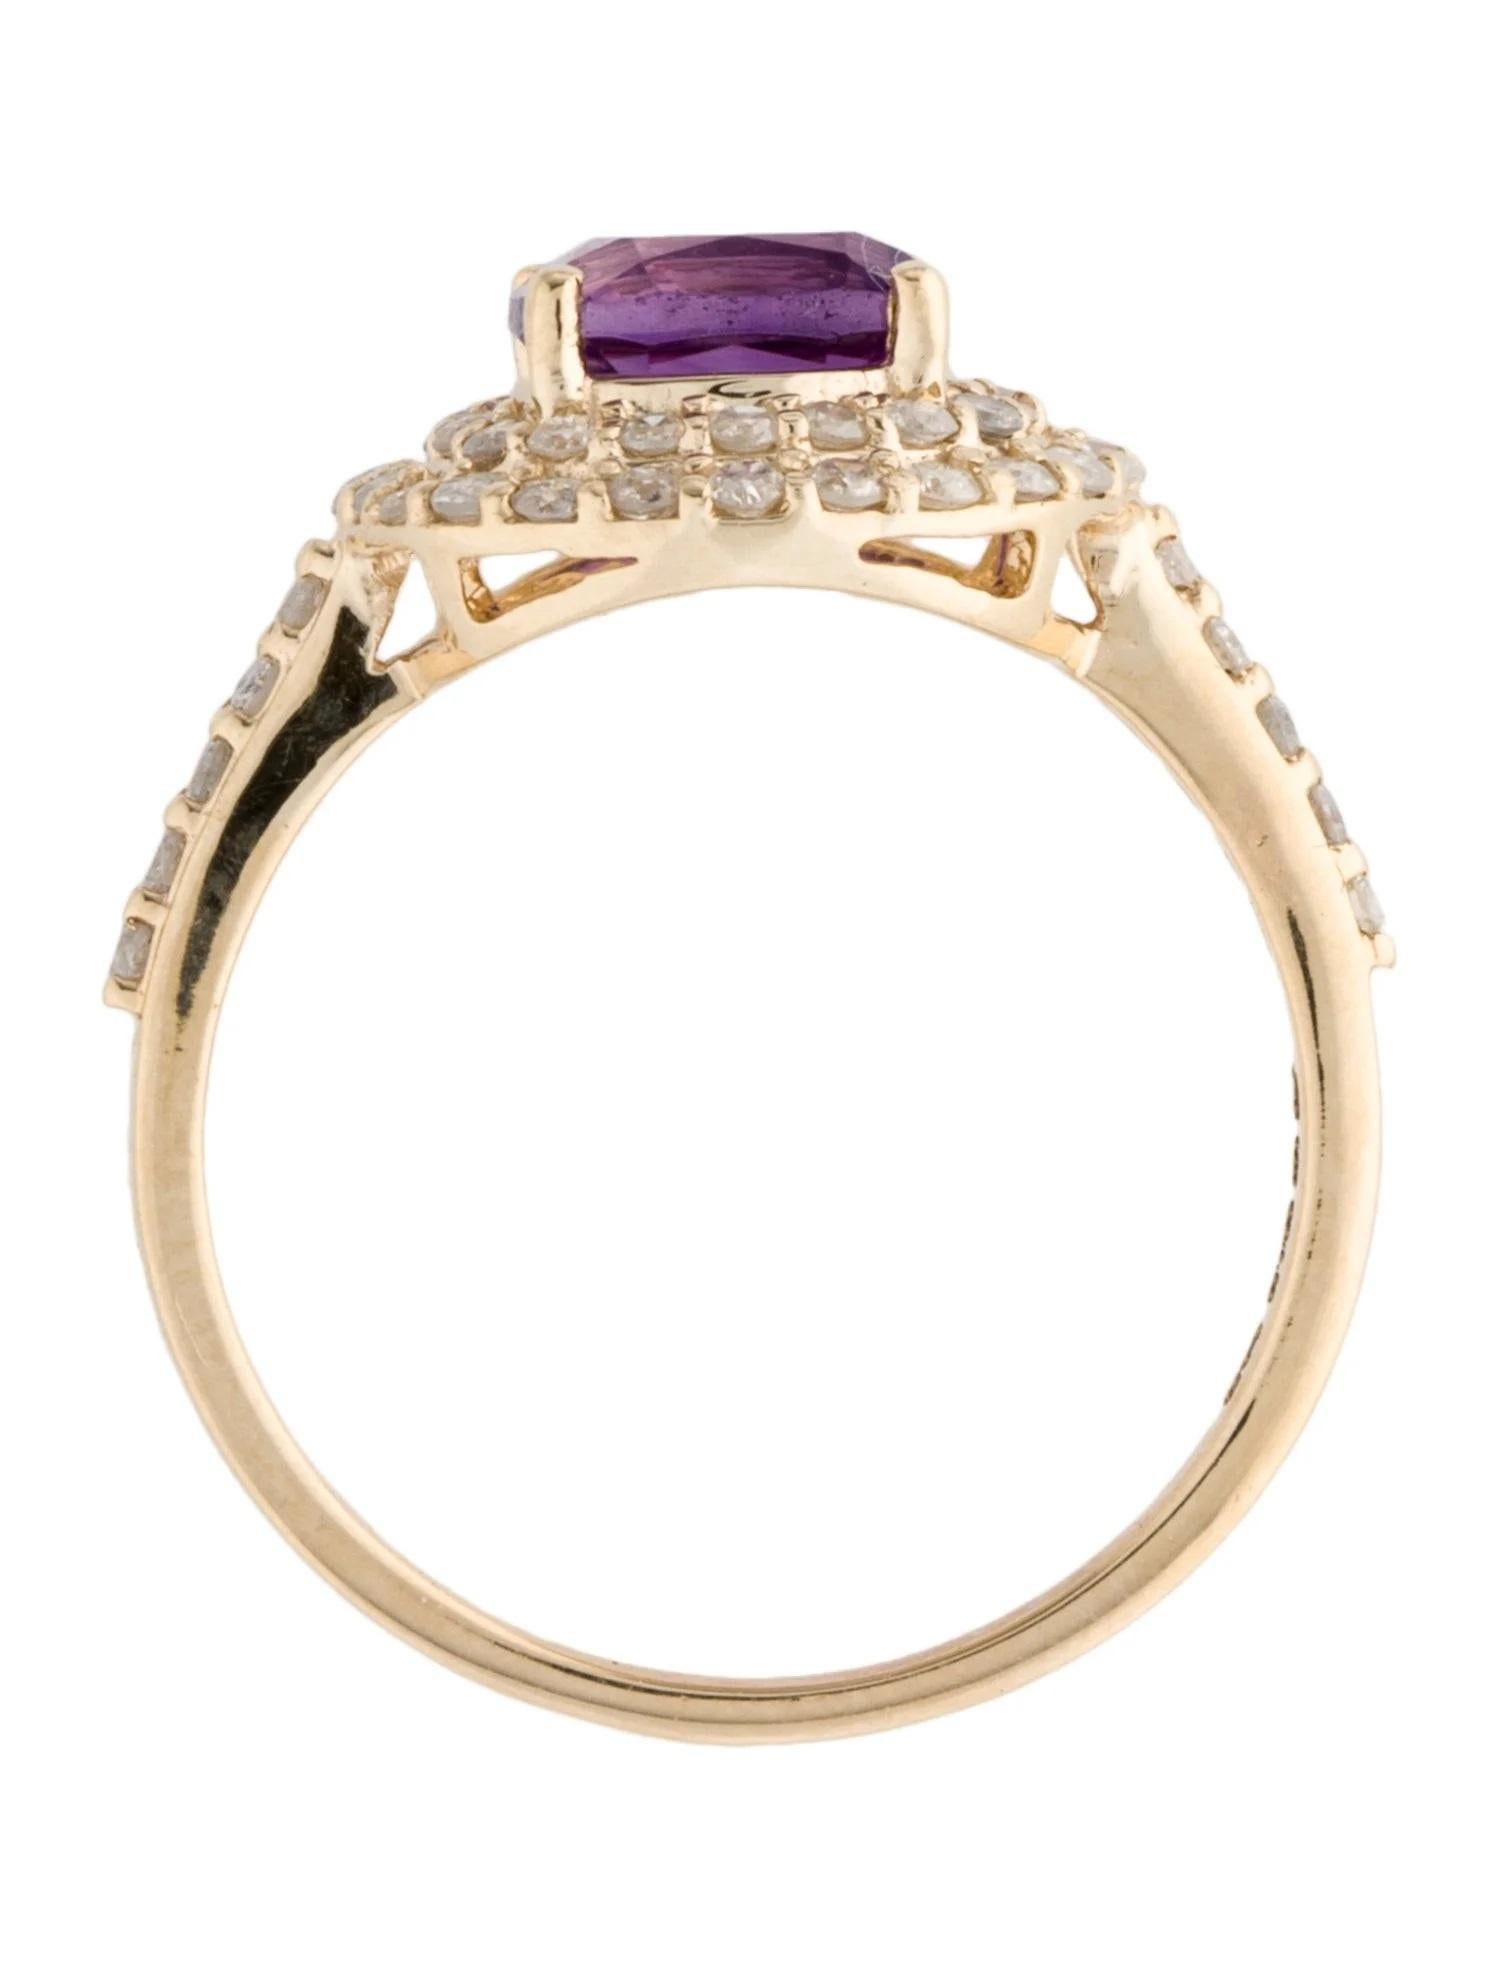 14K Amethyst & Diamond Cocktail Ring, 1.33ct Cushion Modified Brilliant Purple S In New Condition For Sale In Holtsville, NY